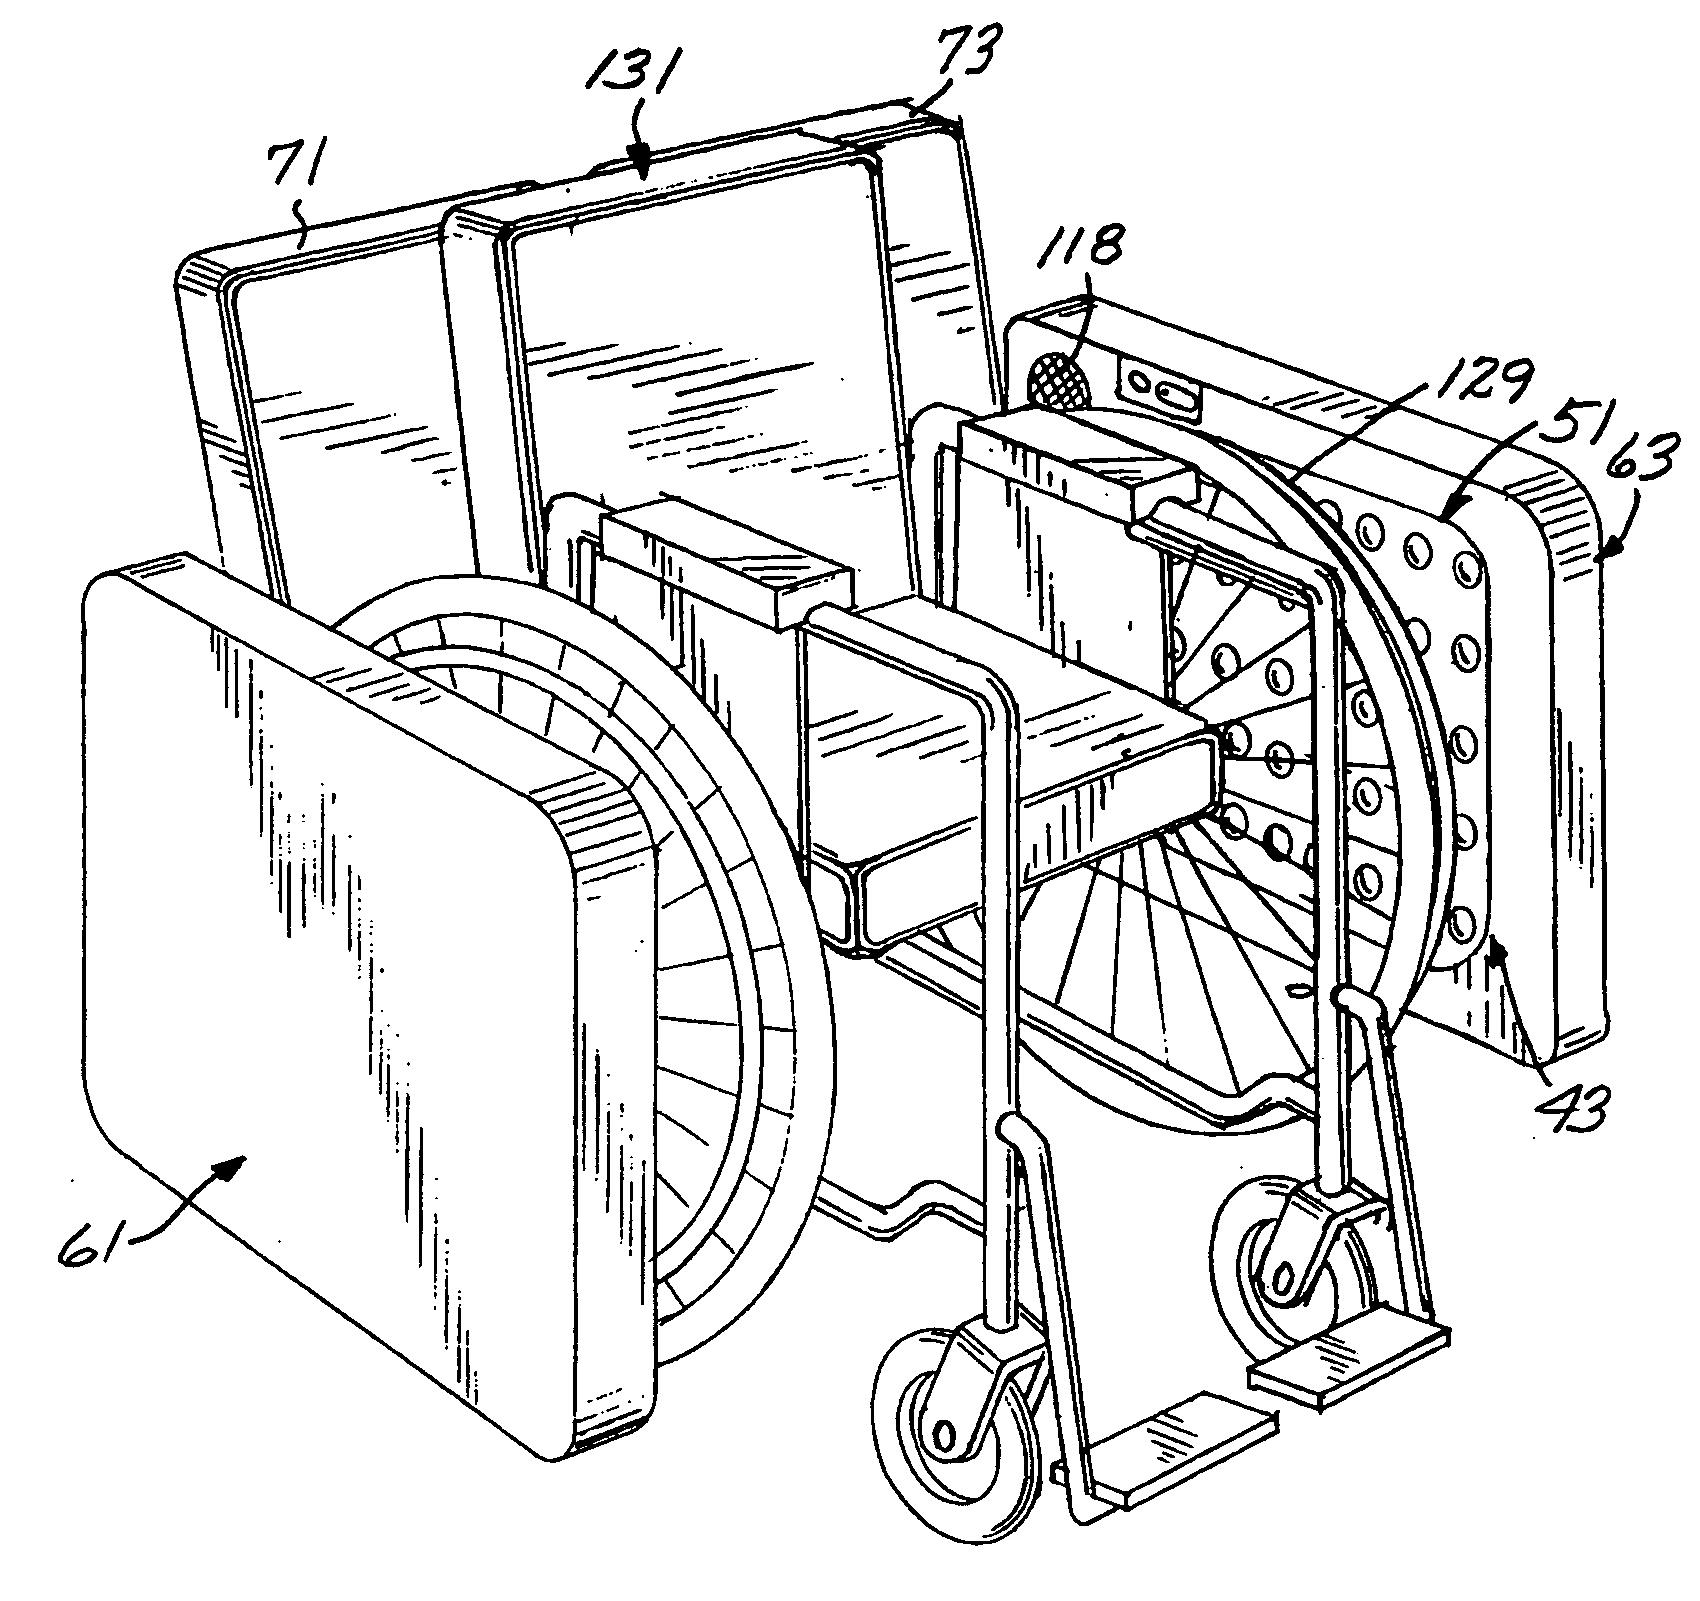 Vehicular wheelchair docking and capture apparatus